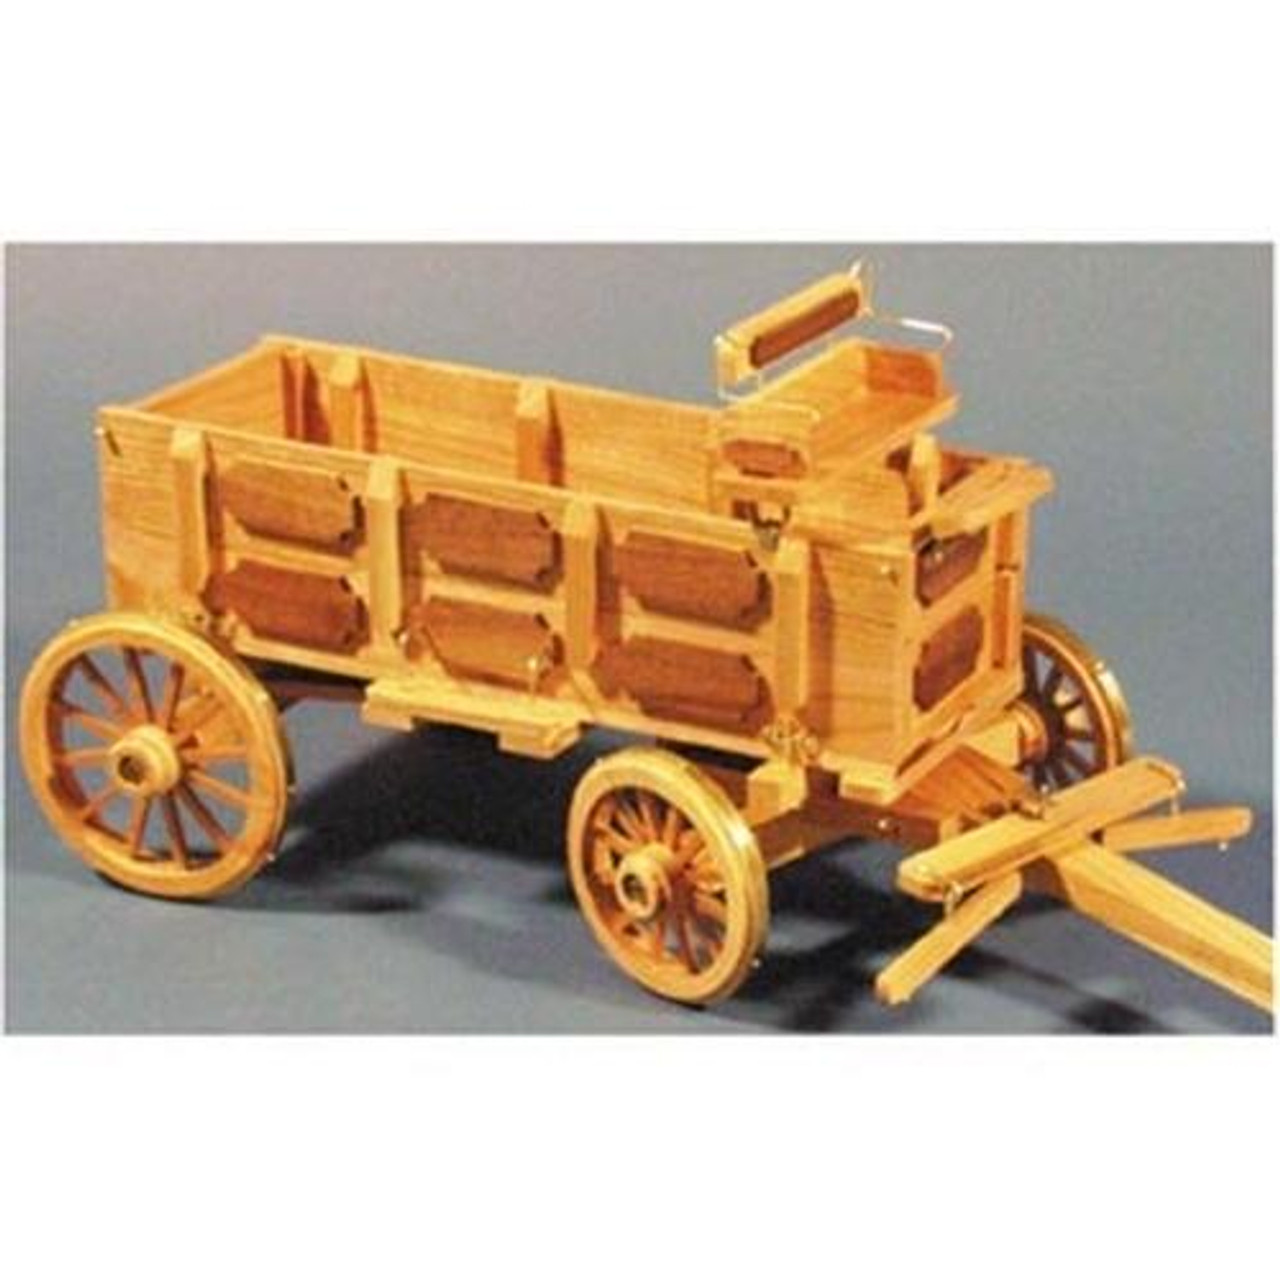 Arts and Crafts for Adults - The Toy Wagon